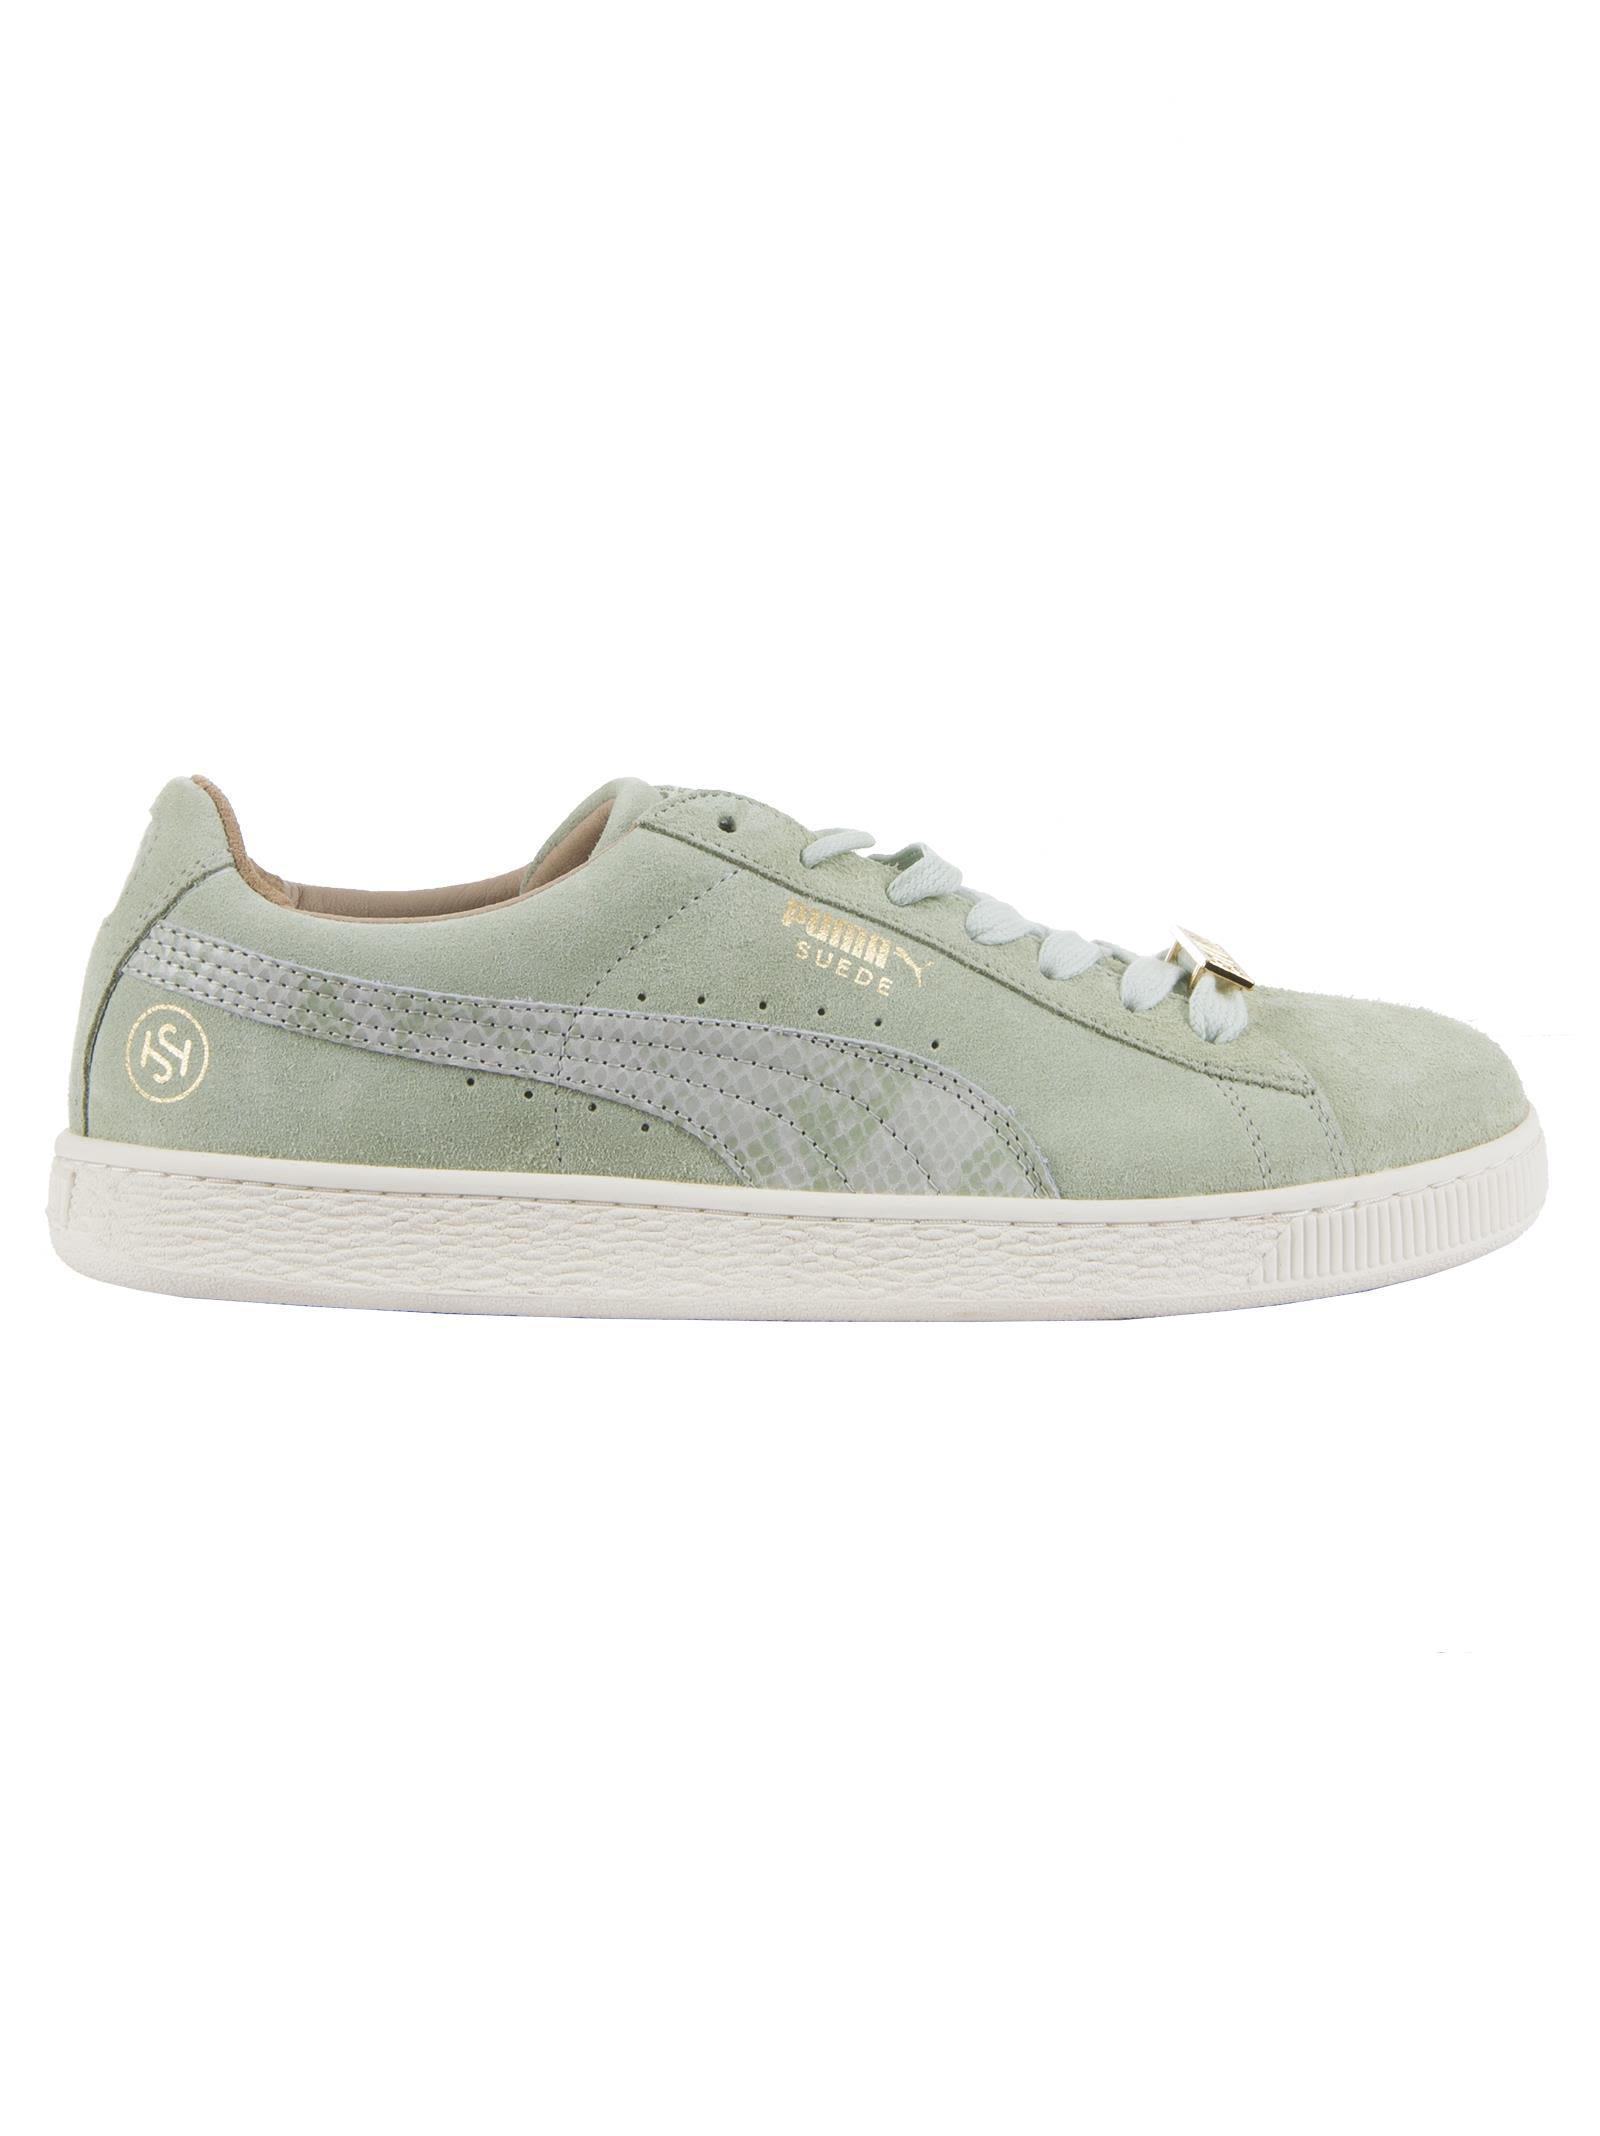 fromage Cible commander puma suede x sonra Coïncidence Fable Majeur